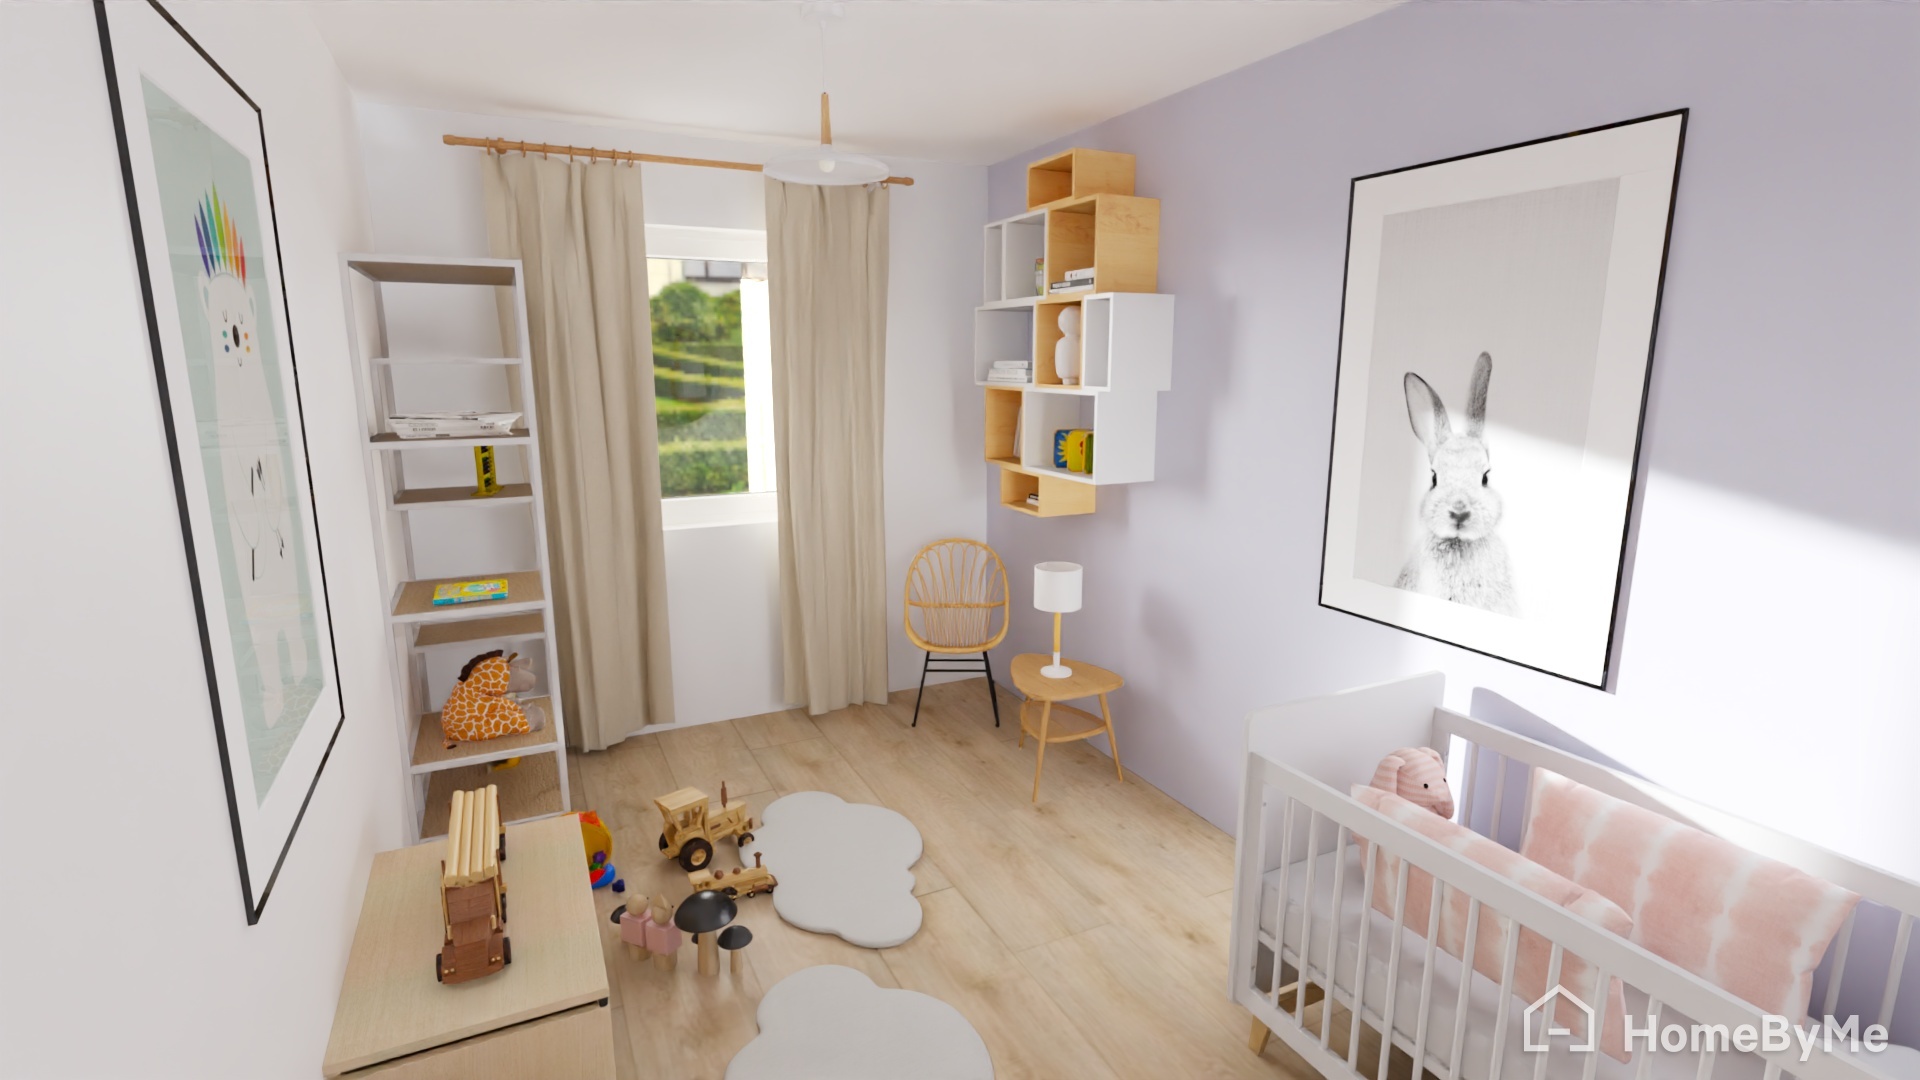 Figaro 3D immo - Full Homebyme - Ambiance moderne